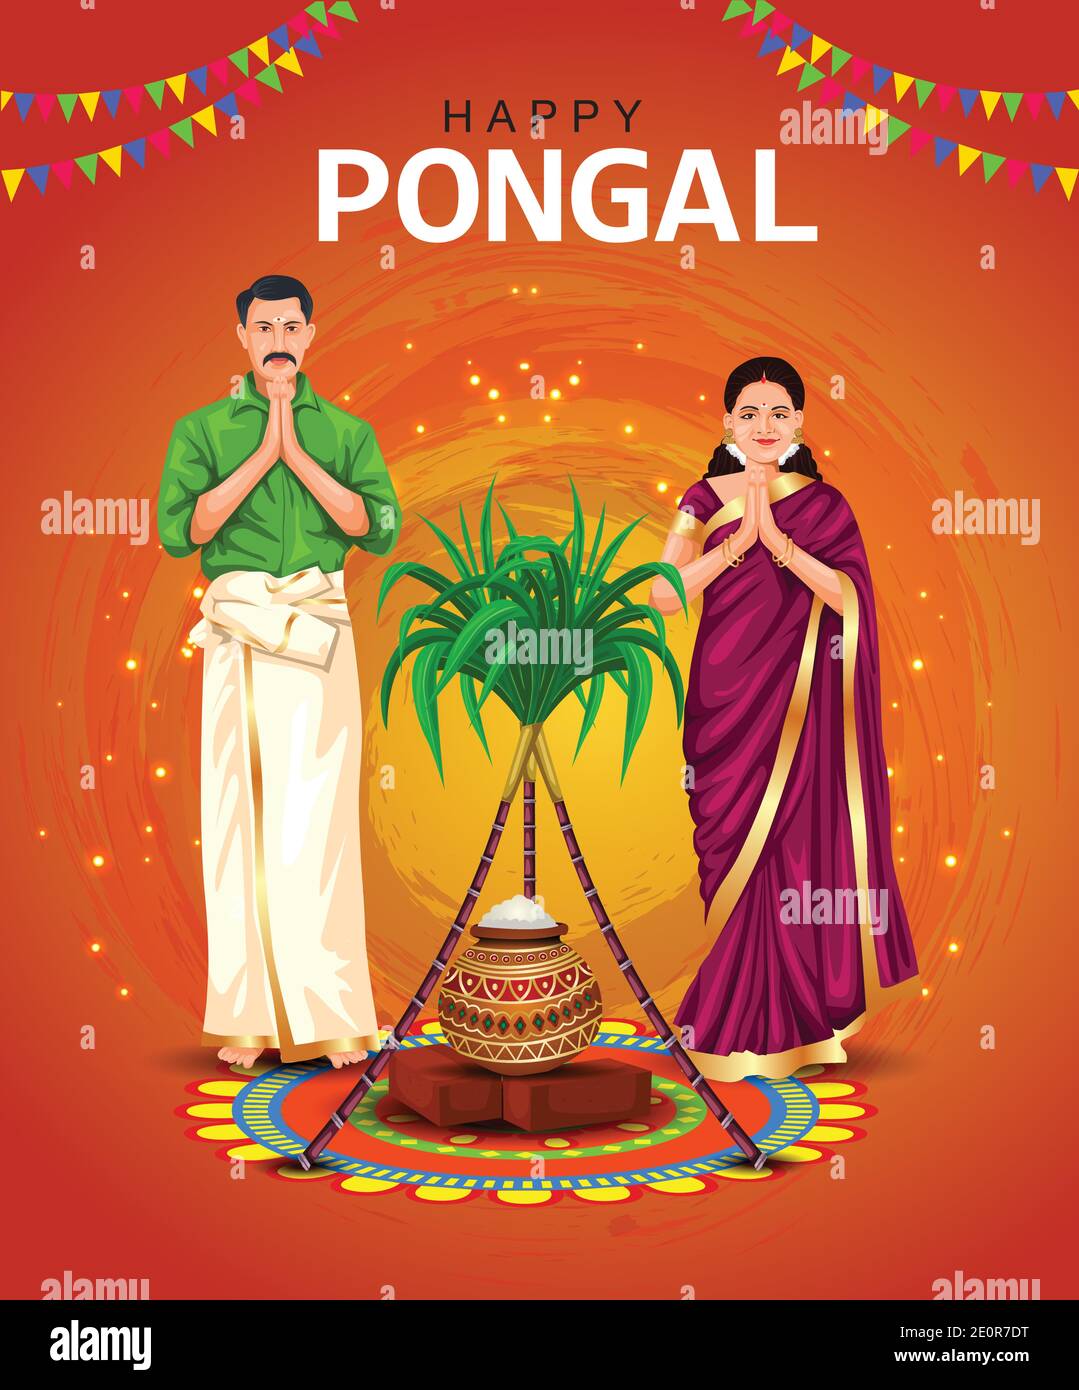 Happy Pongal celebration with sugarcane, Rangoli and pot of rice. Tamil family offering prayers. Indian cultural festival celebration concept illustra Stock Vector